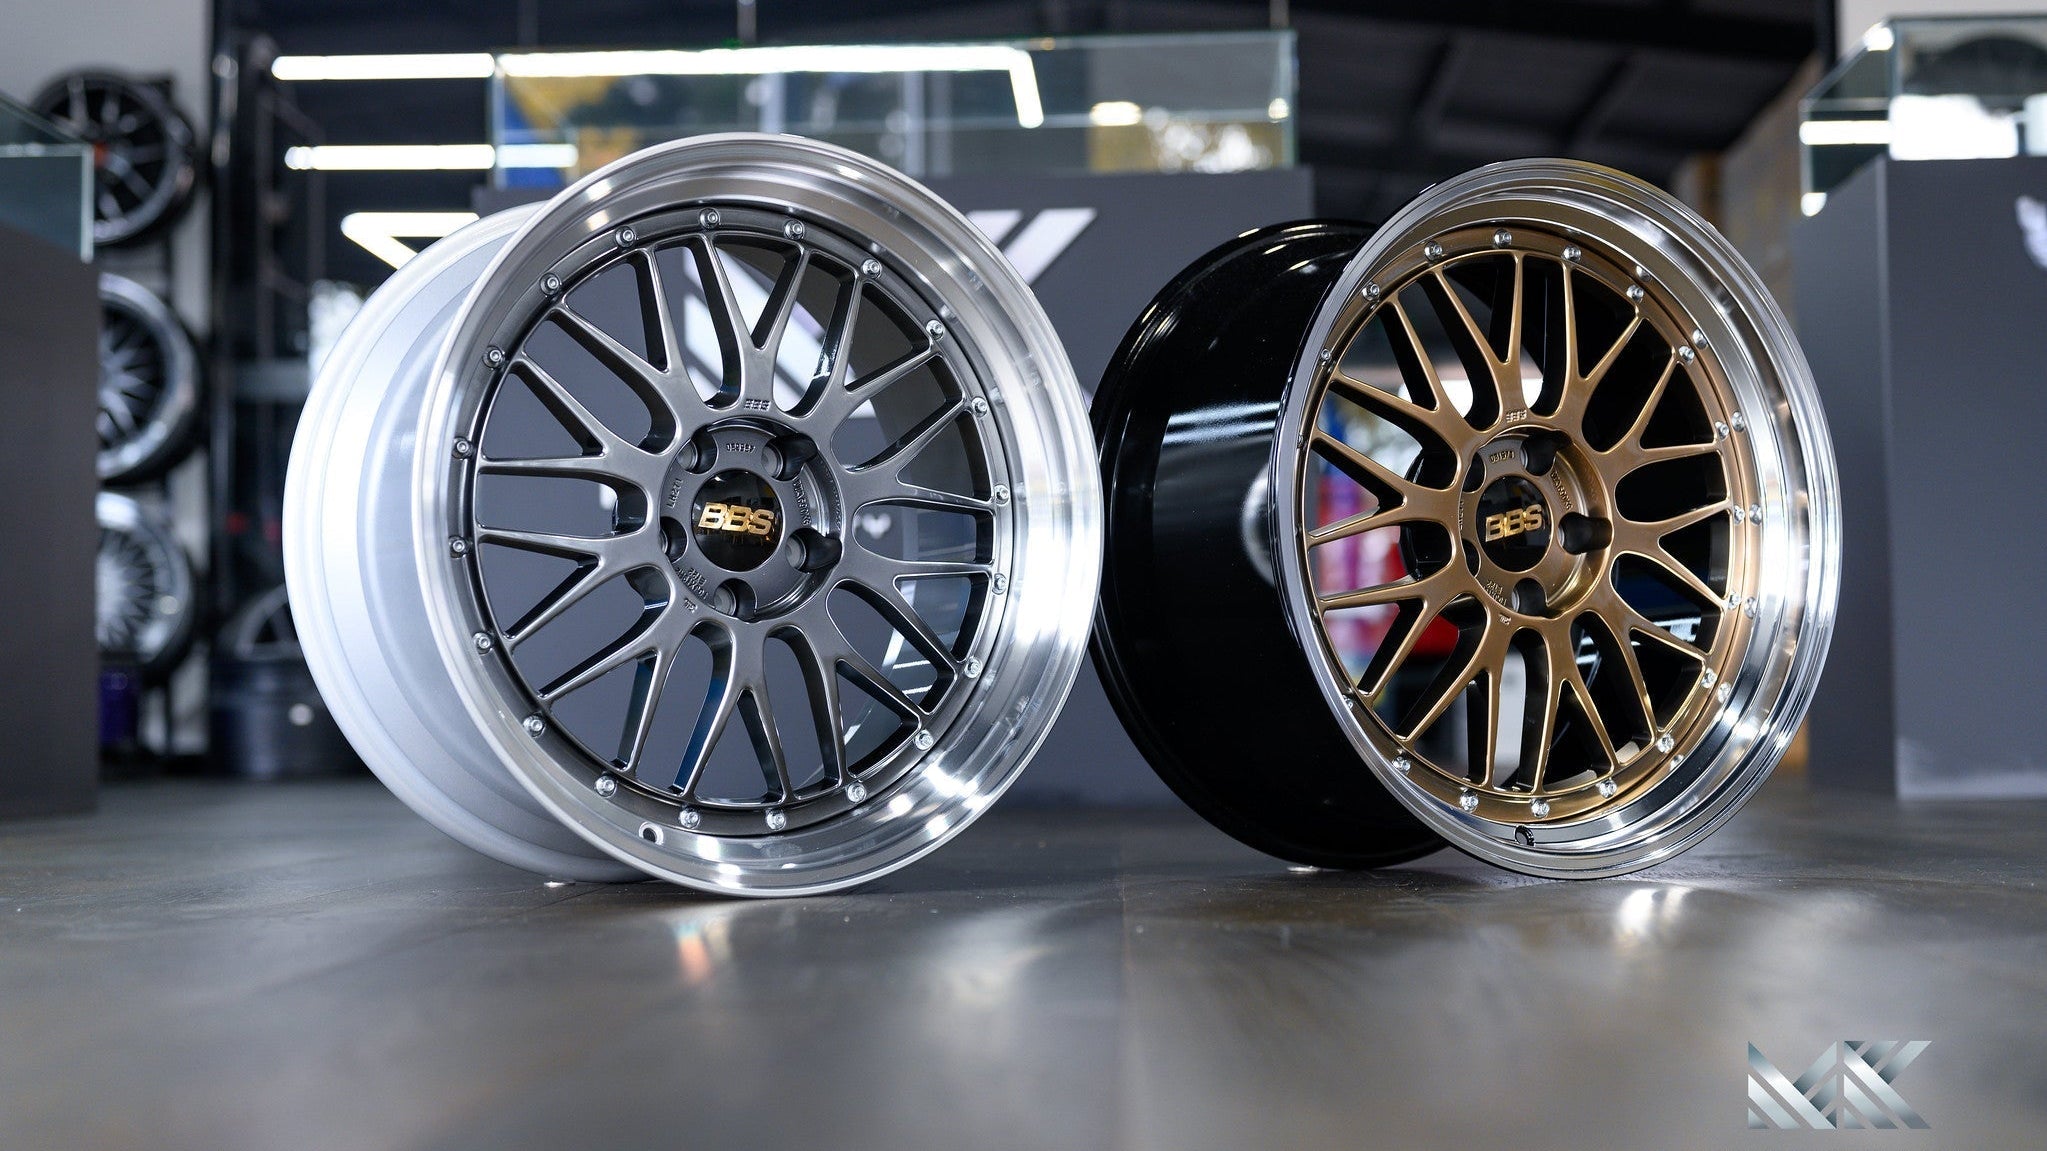 BBS LM413 - Premium Wheels from BBS Japan - From just $5490.00! Shop now at MK MOTORSPORTS